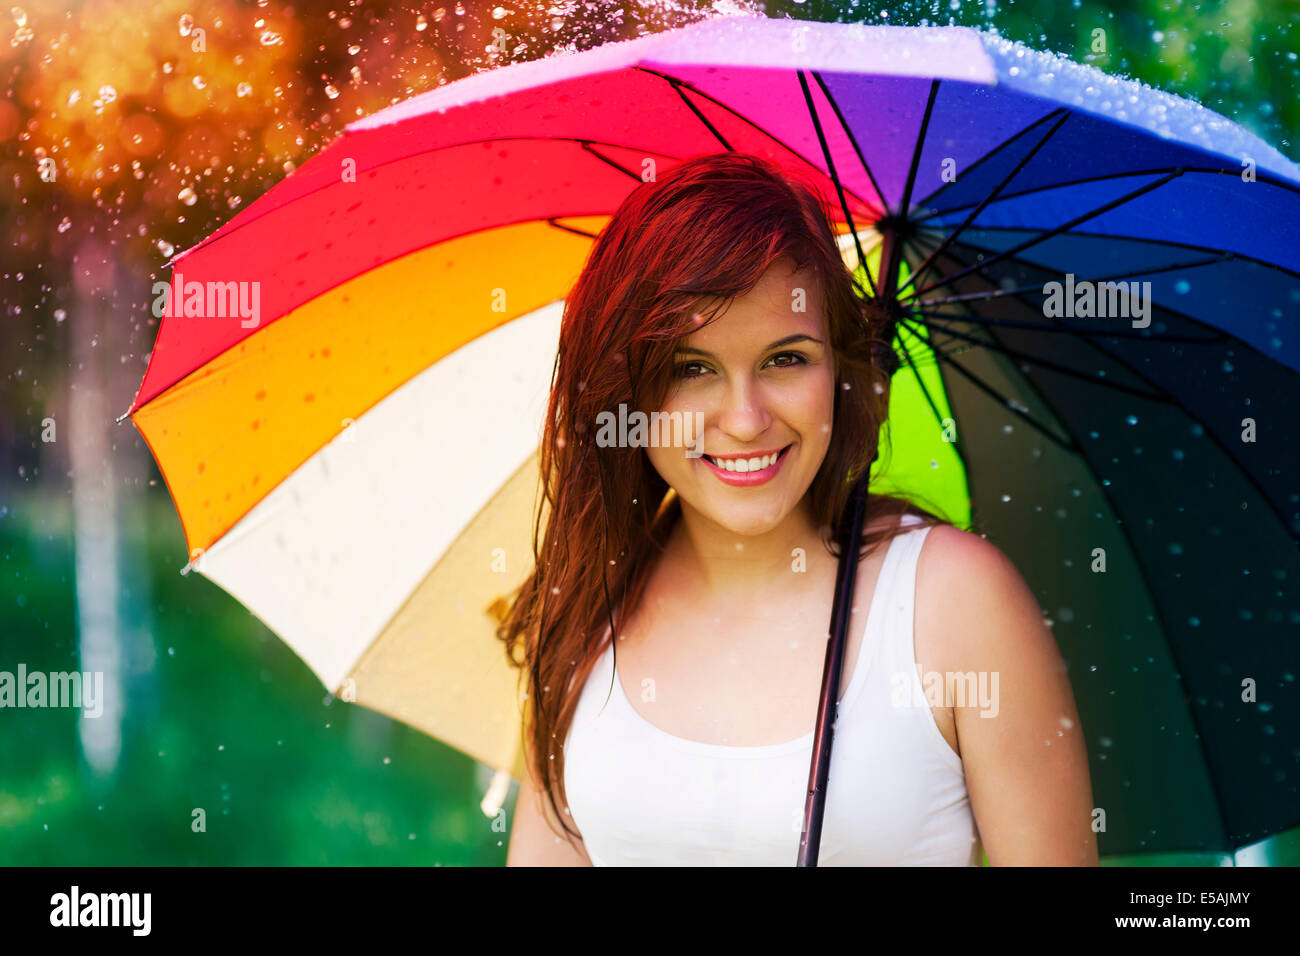 Portrait of beautiful and smiling woman with umbrella, Debica, Poland. Stock Photo